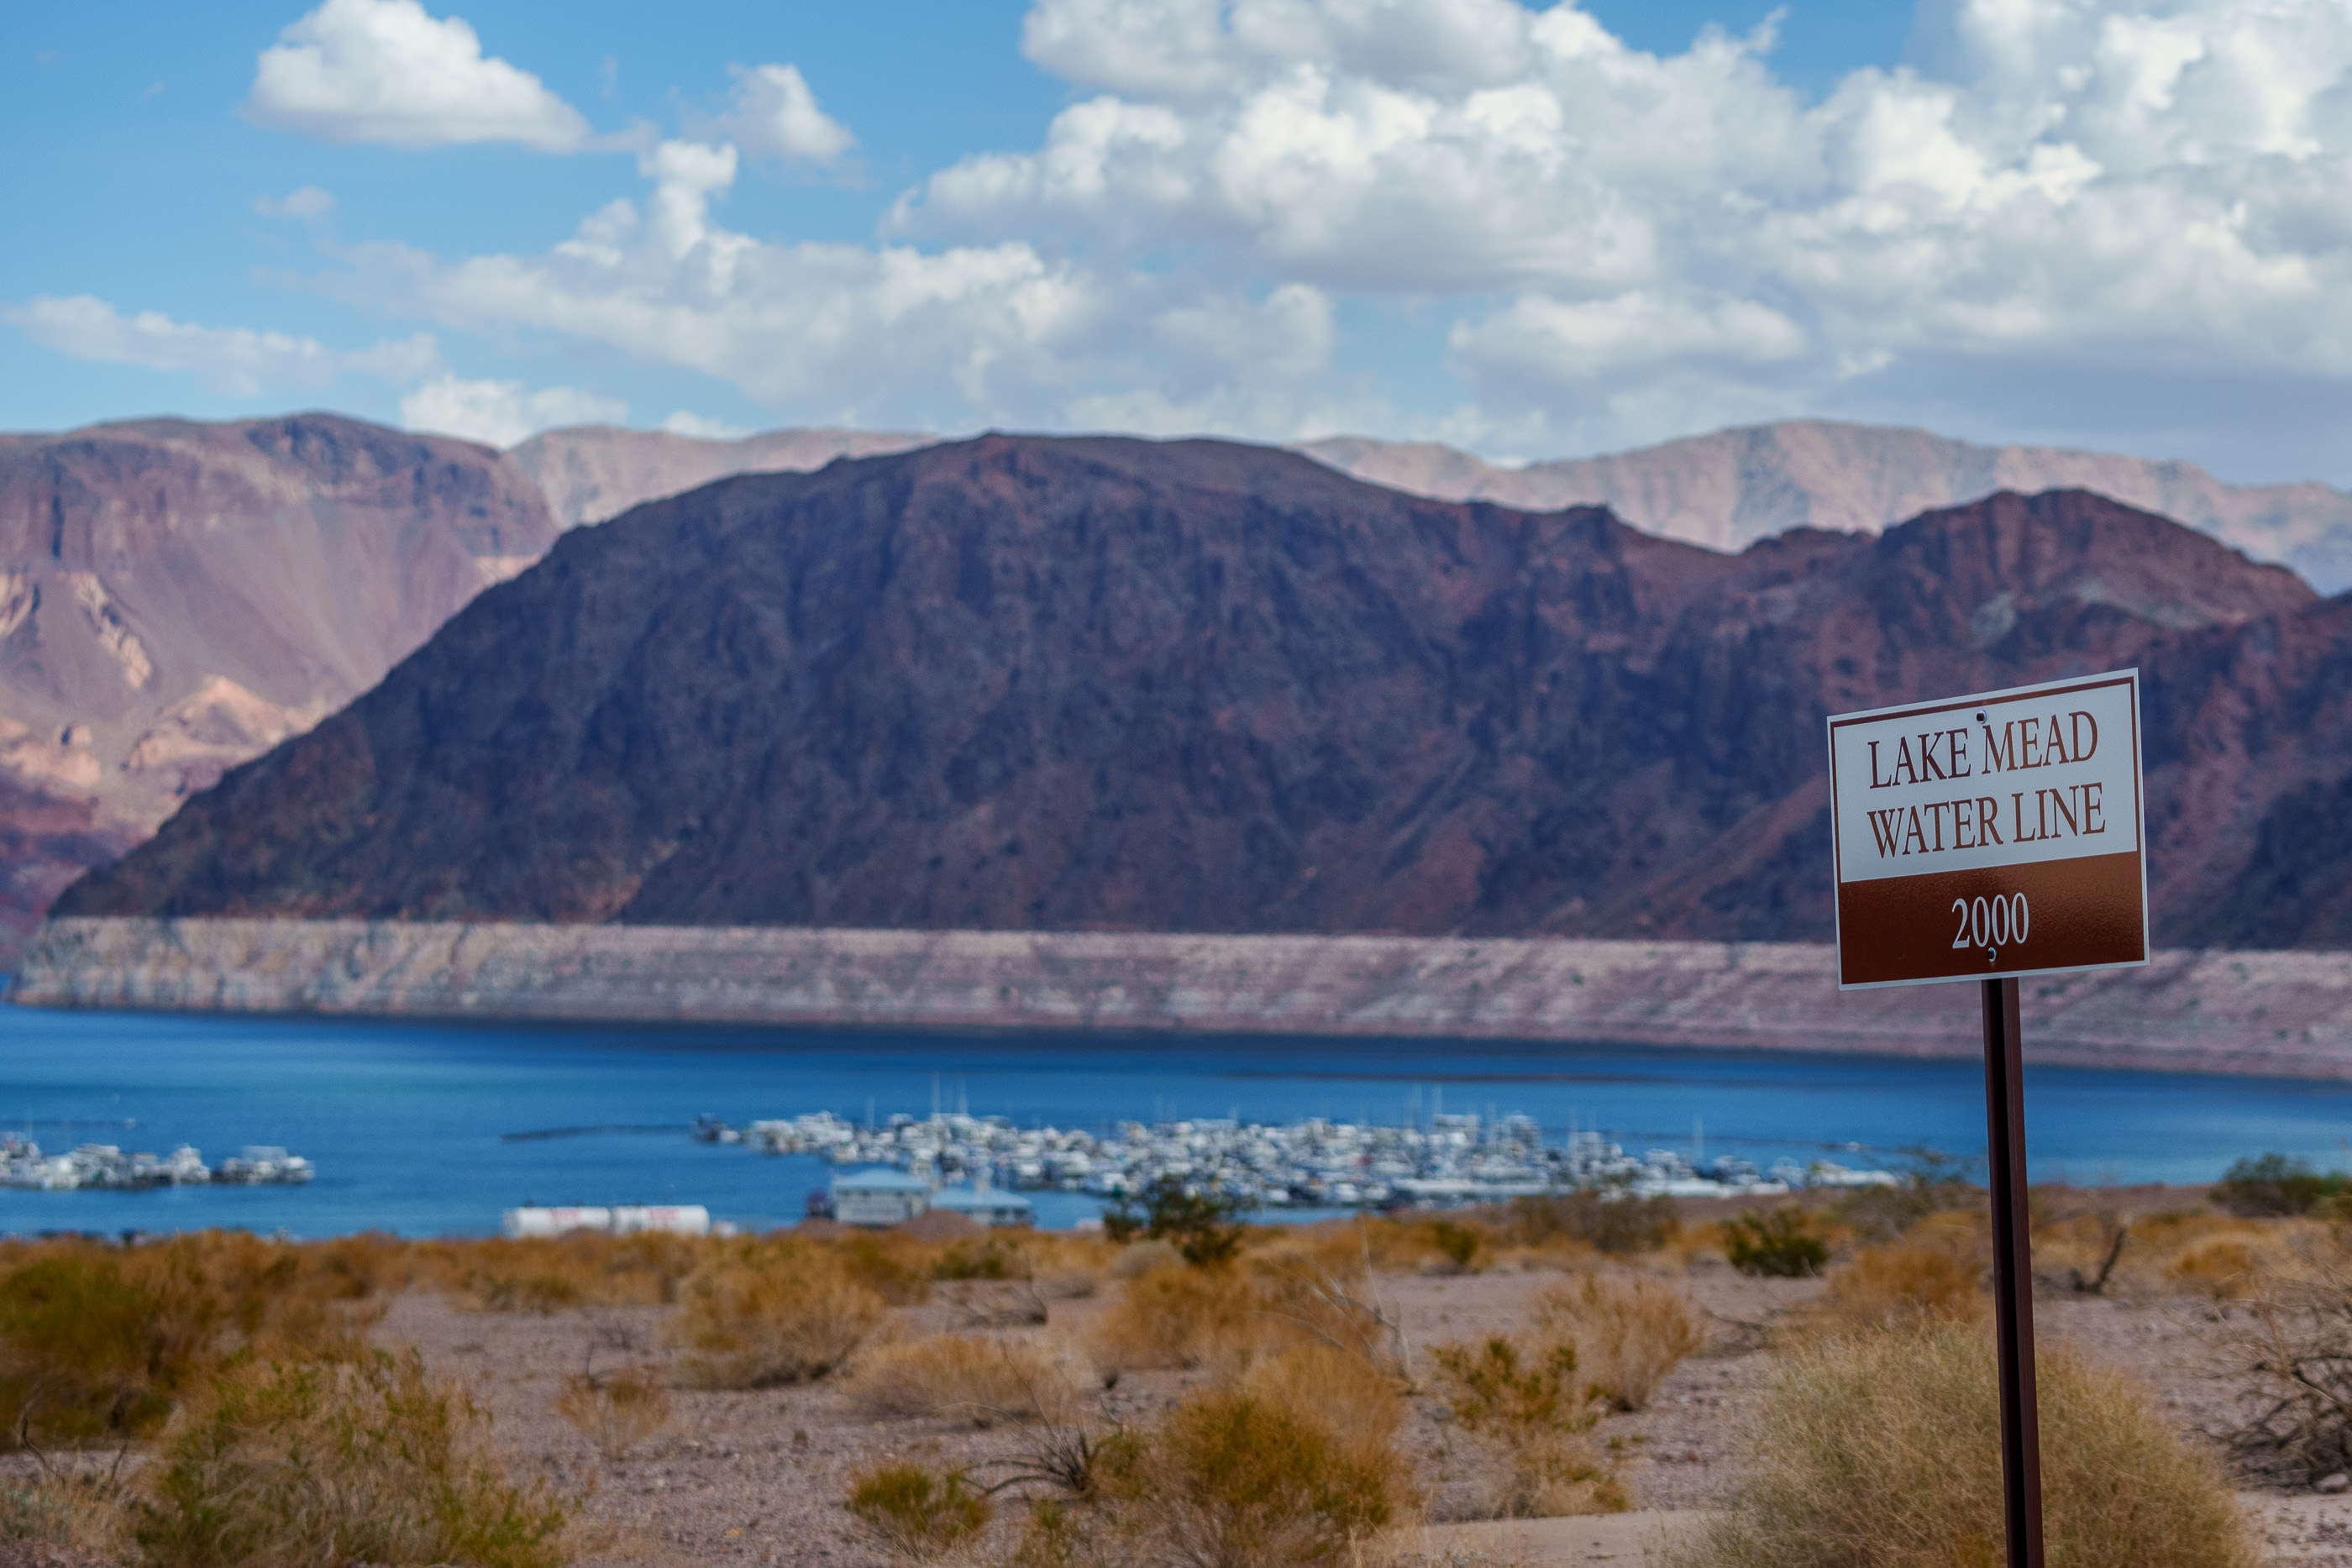 How Does Las Vegas Water Compare to Other Areas?